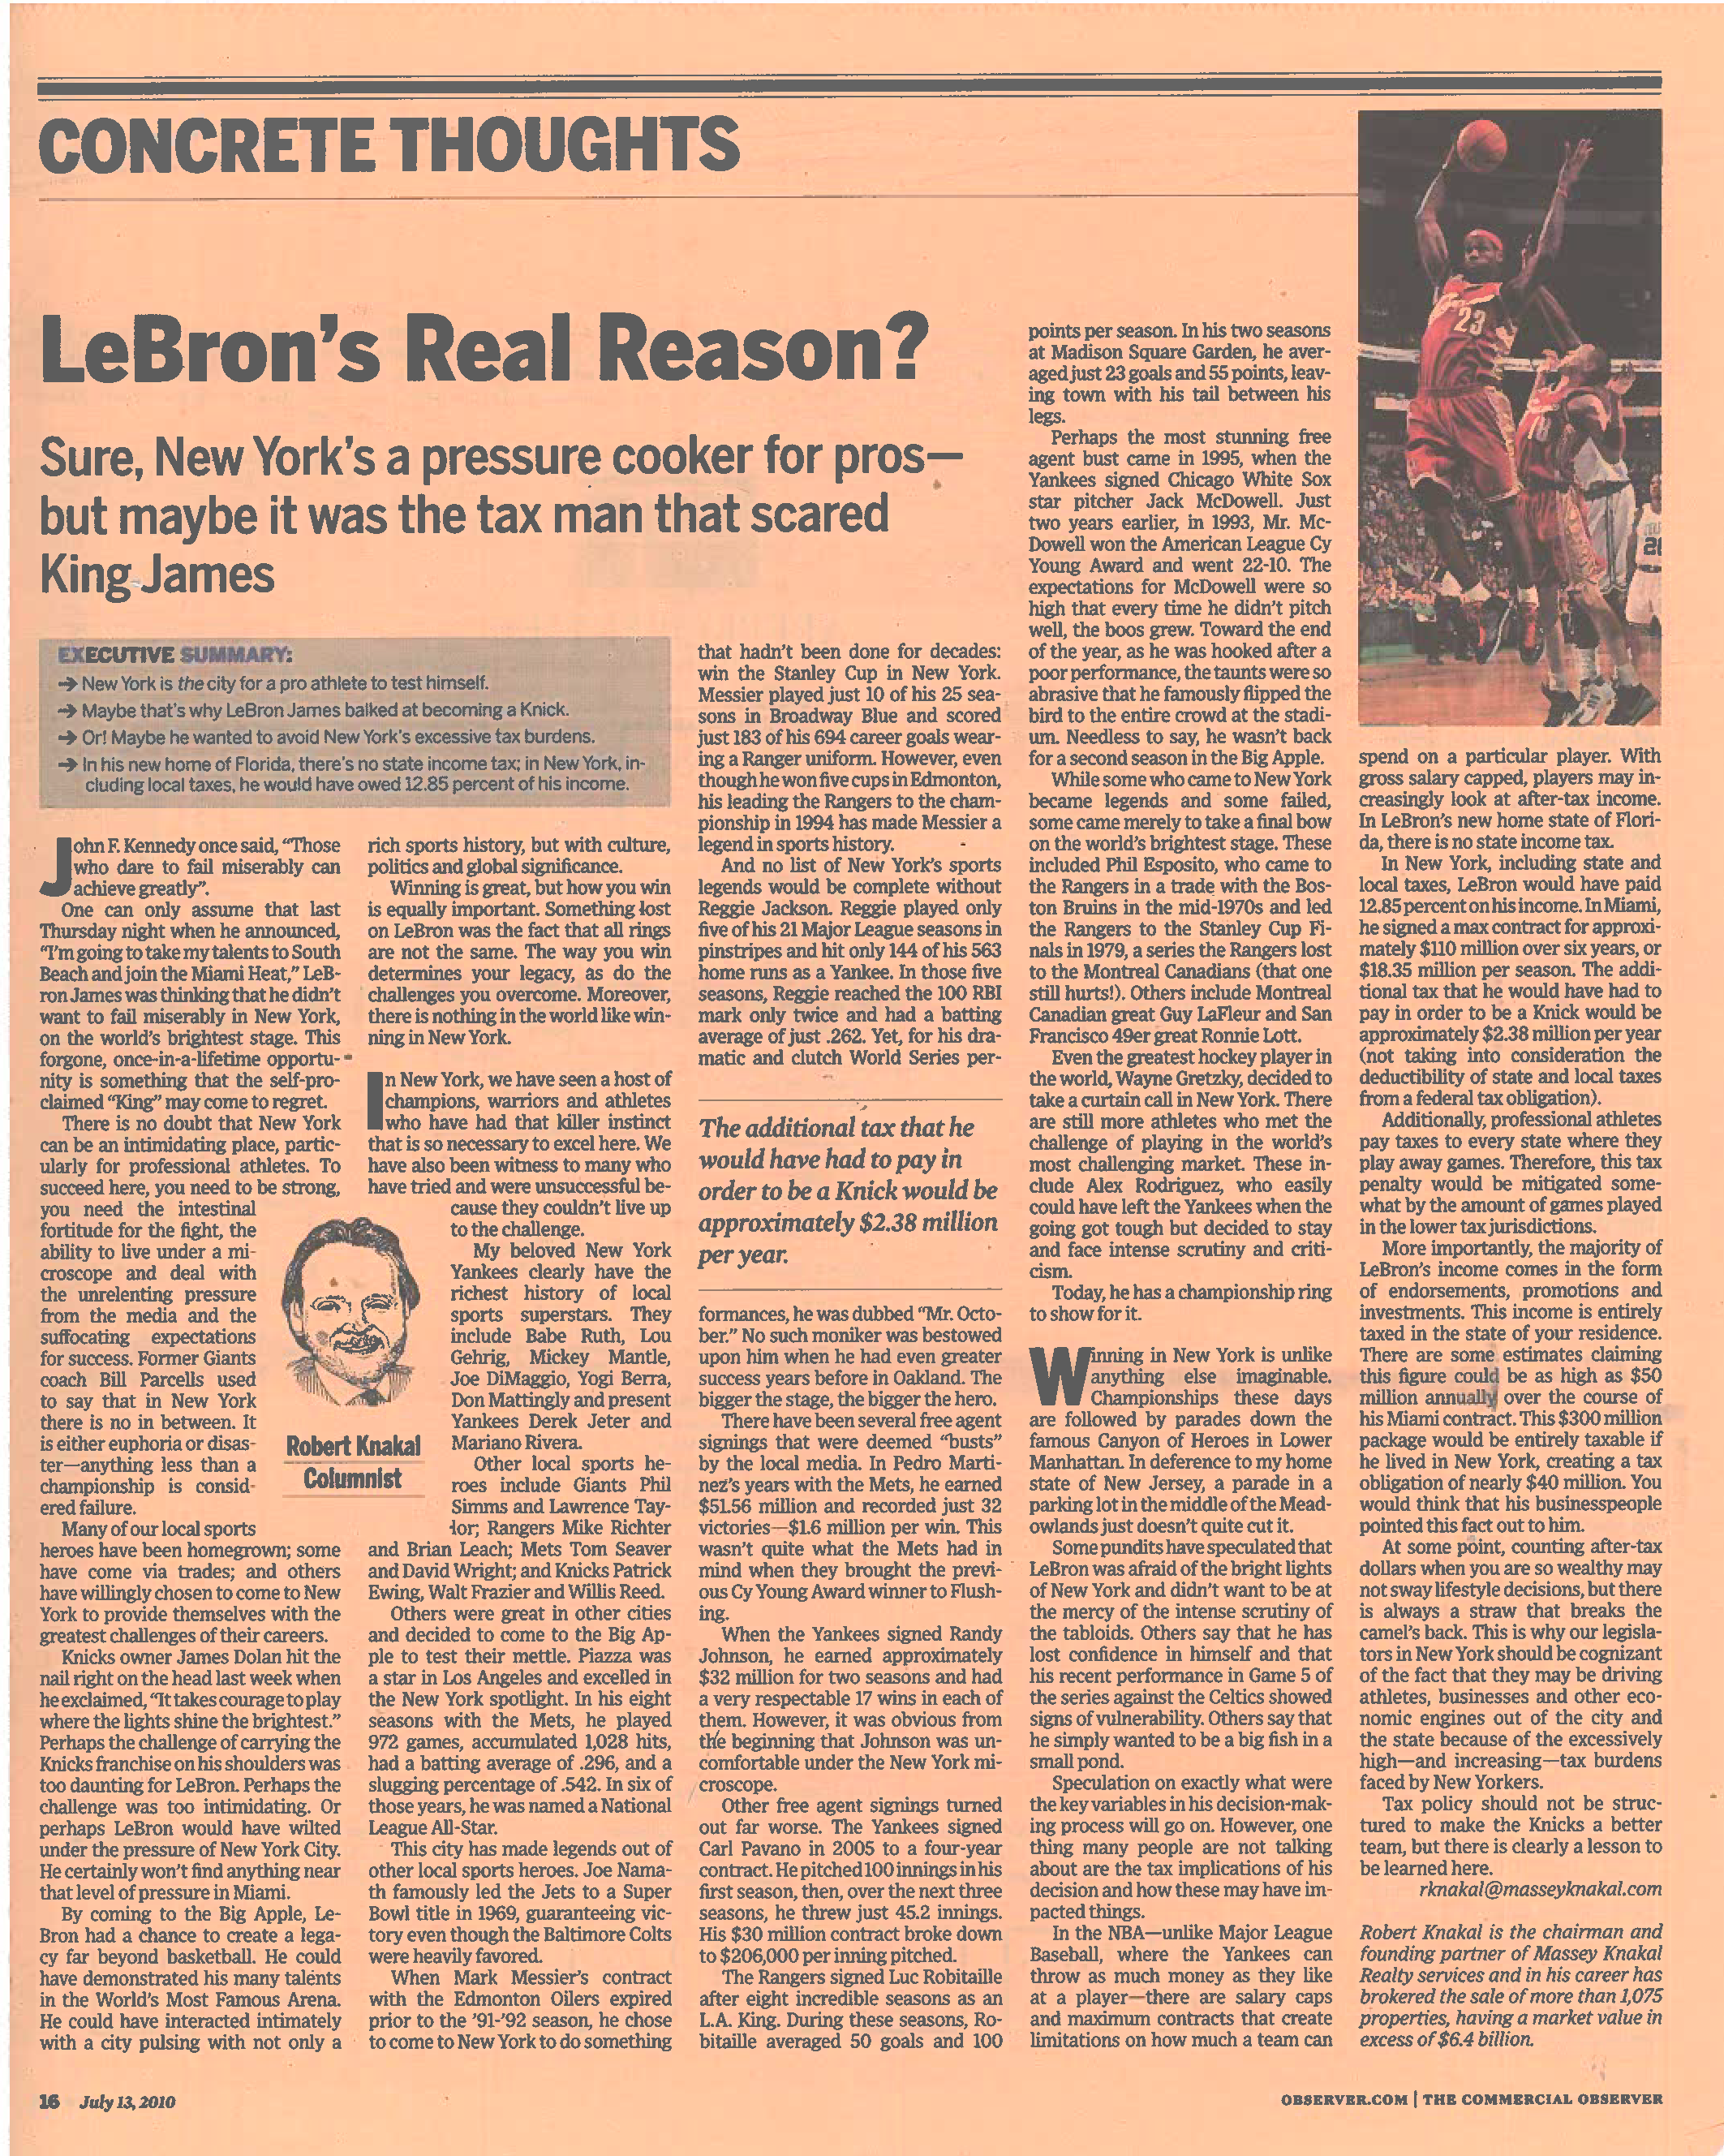 Concrete Thoughts - LeBron_s Real Reason - July 13 2010